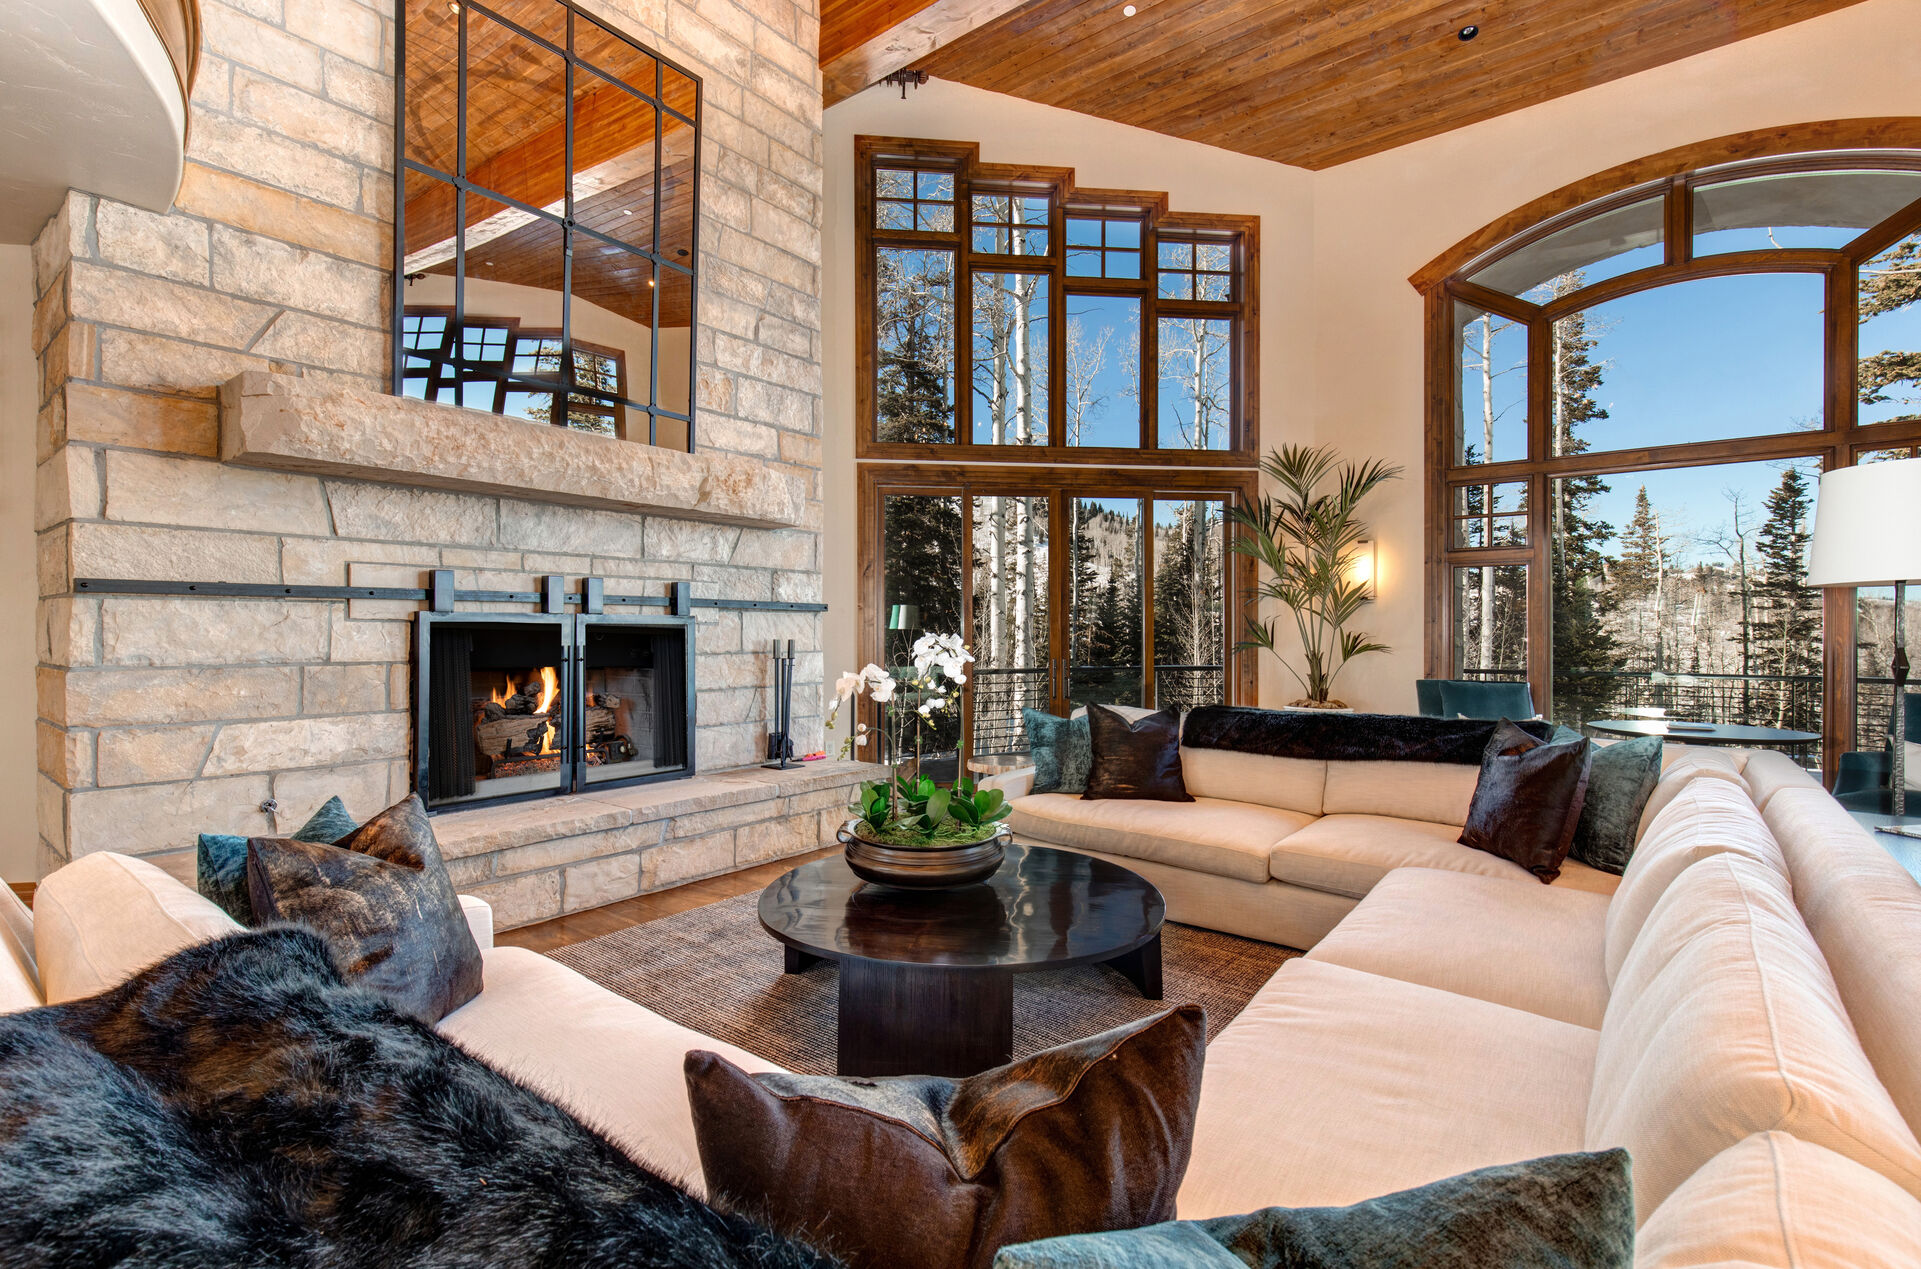 Enormous Upper Living Room with three separate sitting areas. This room provides ample seating, large wood-burning fireplace, and private, recently remodeled, sun-deck access